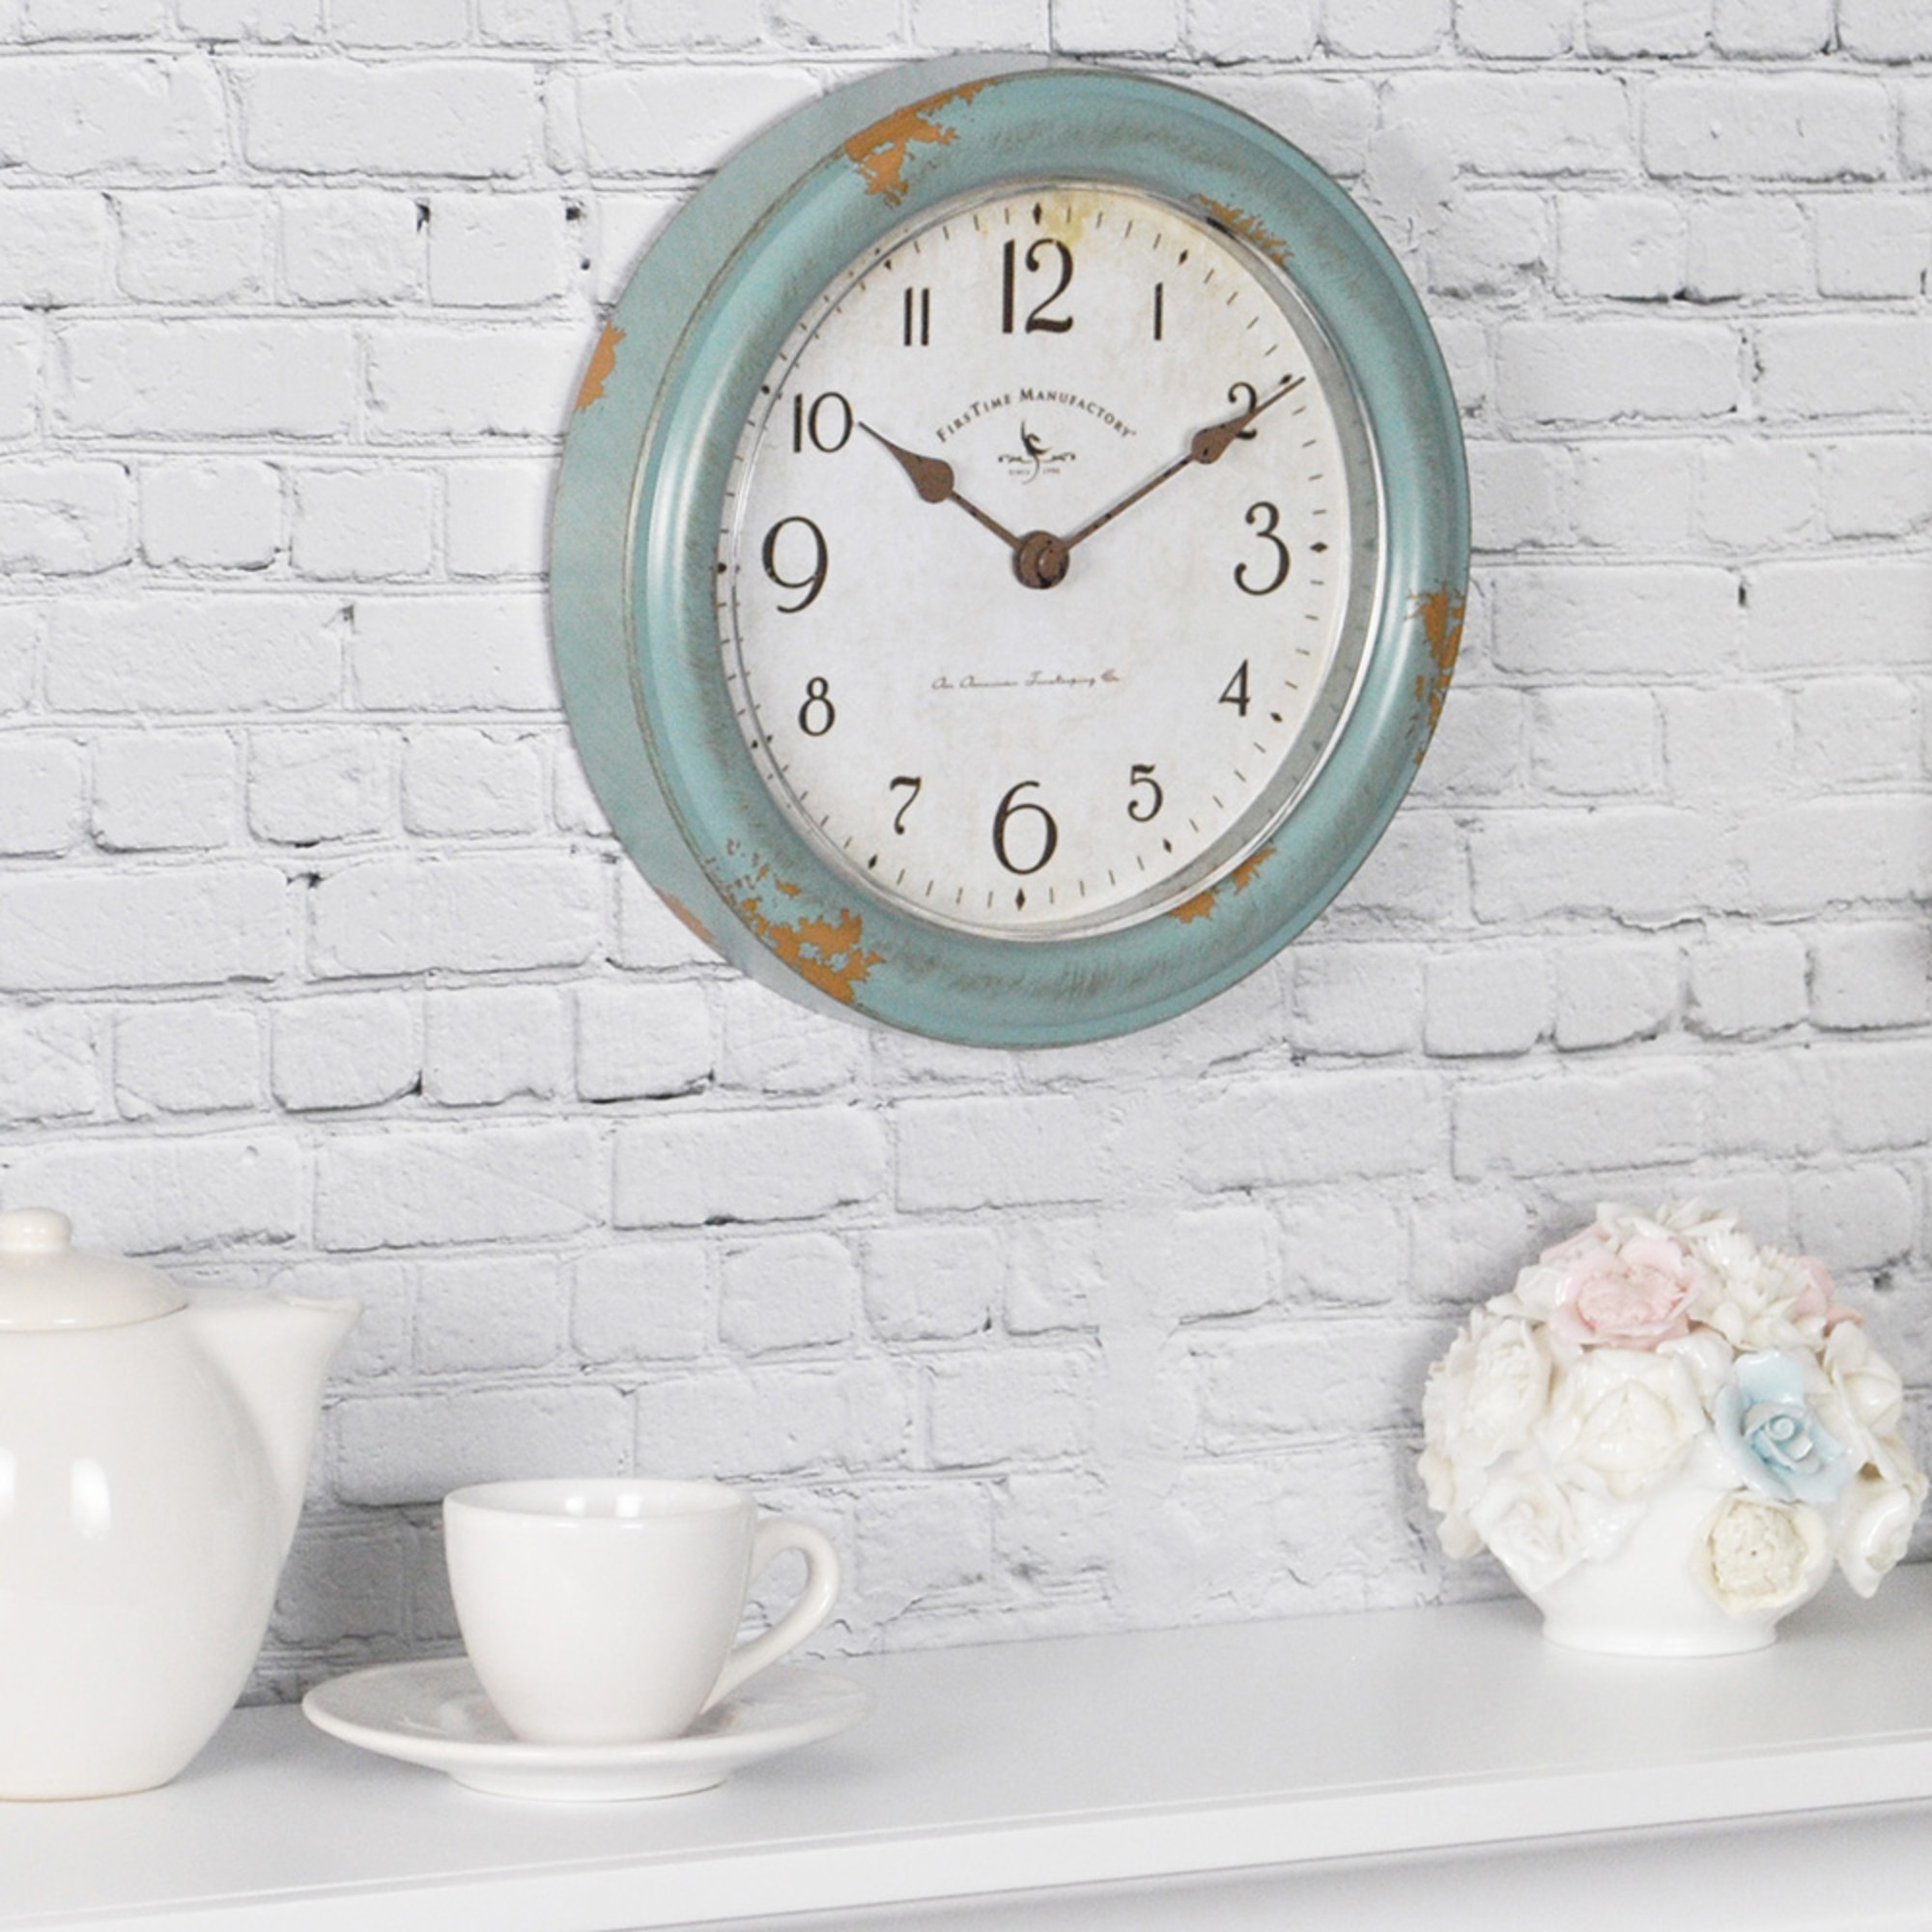 FirsTime & Co.® Teal Patina Farmhouse Wall Clock, Farmhouse, Analog, 8.5 x 2 x 8.5 in - image 1 of 5